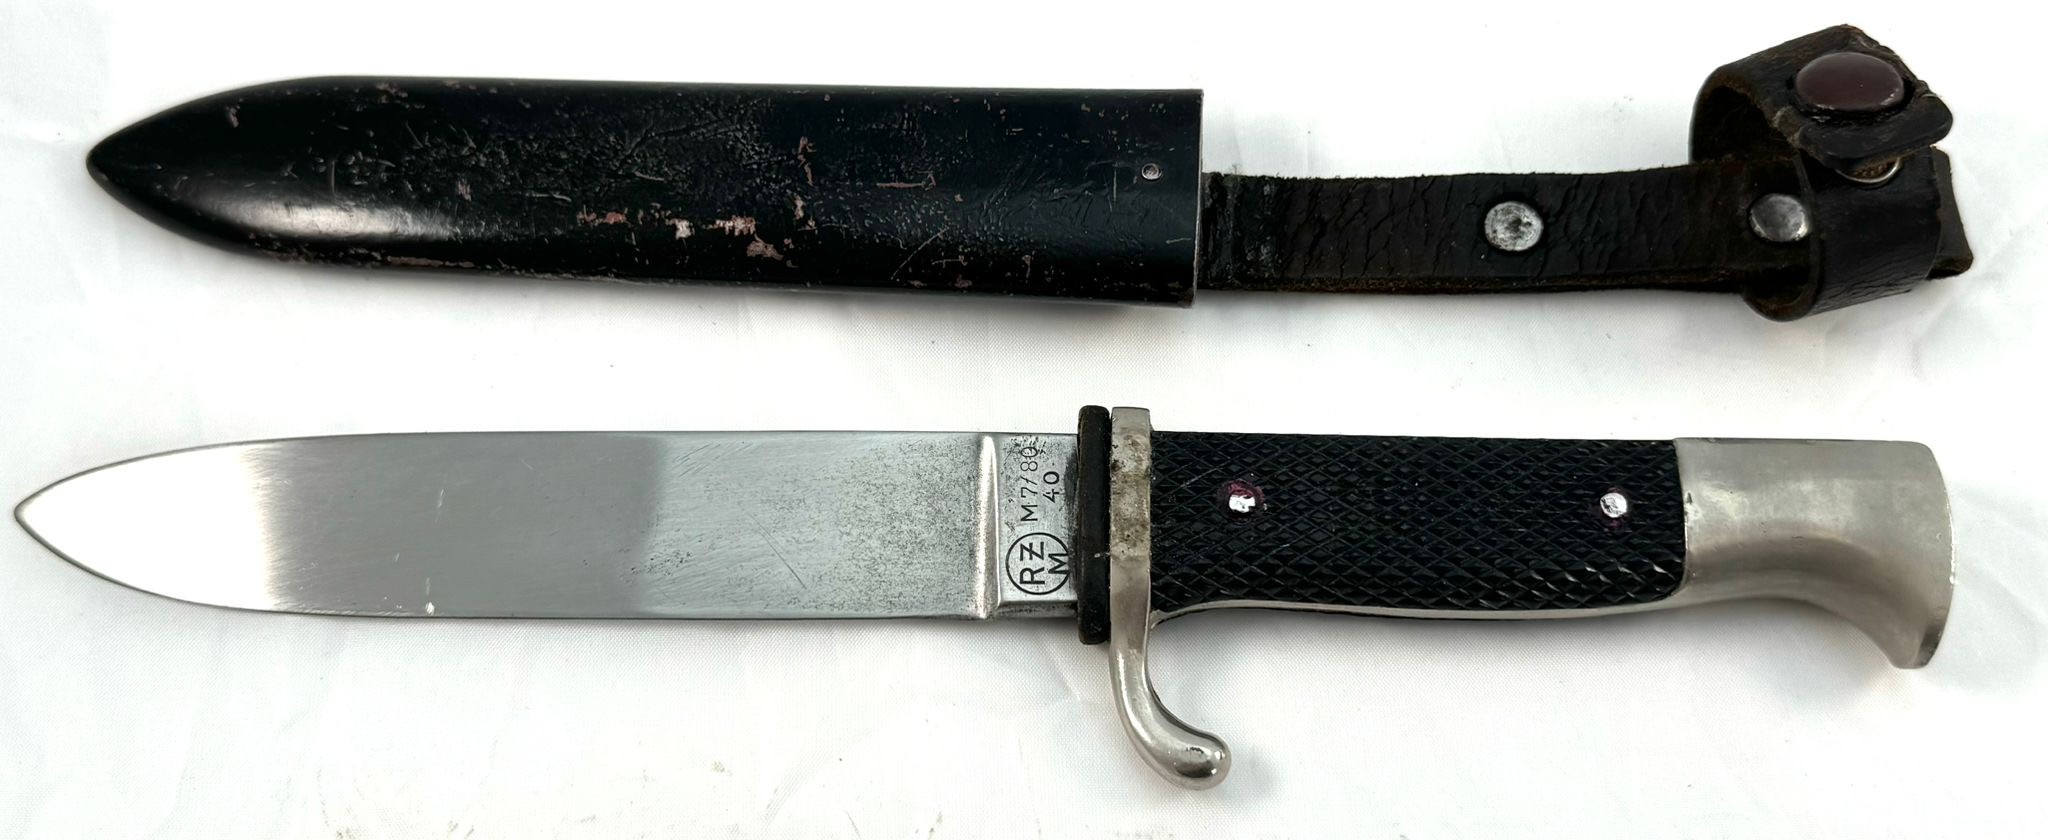 A WW2 Hitler Youth Dagger, with maker stamp RZM 7/80 /40 for Gustav C. Spitzer 1940, with painted